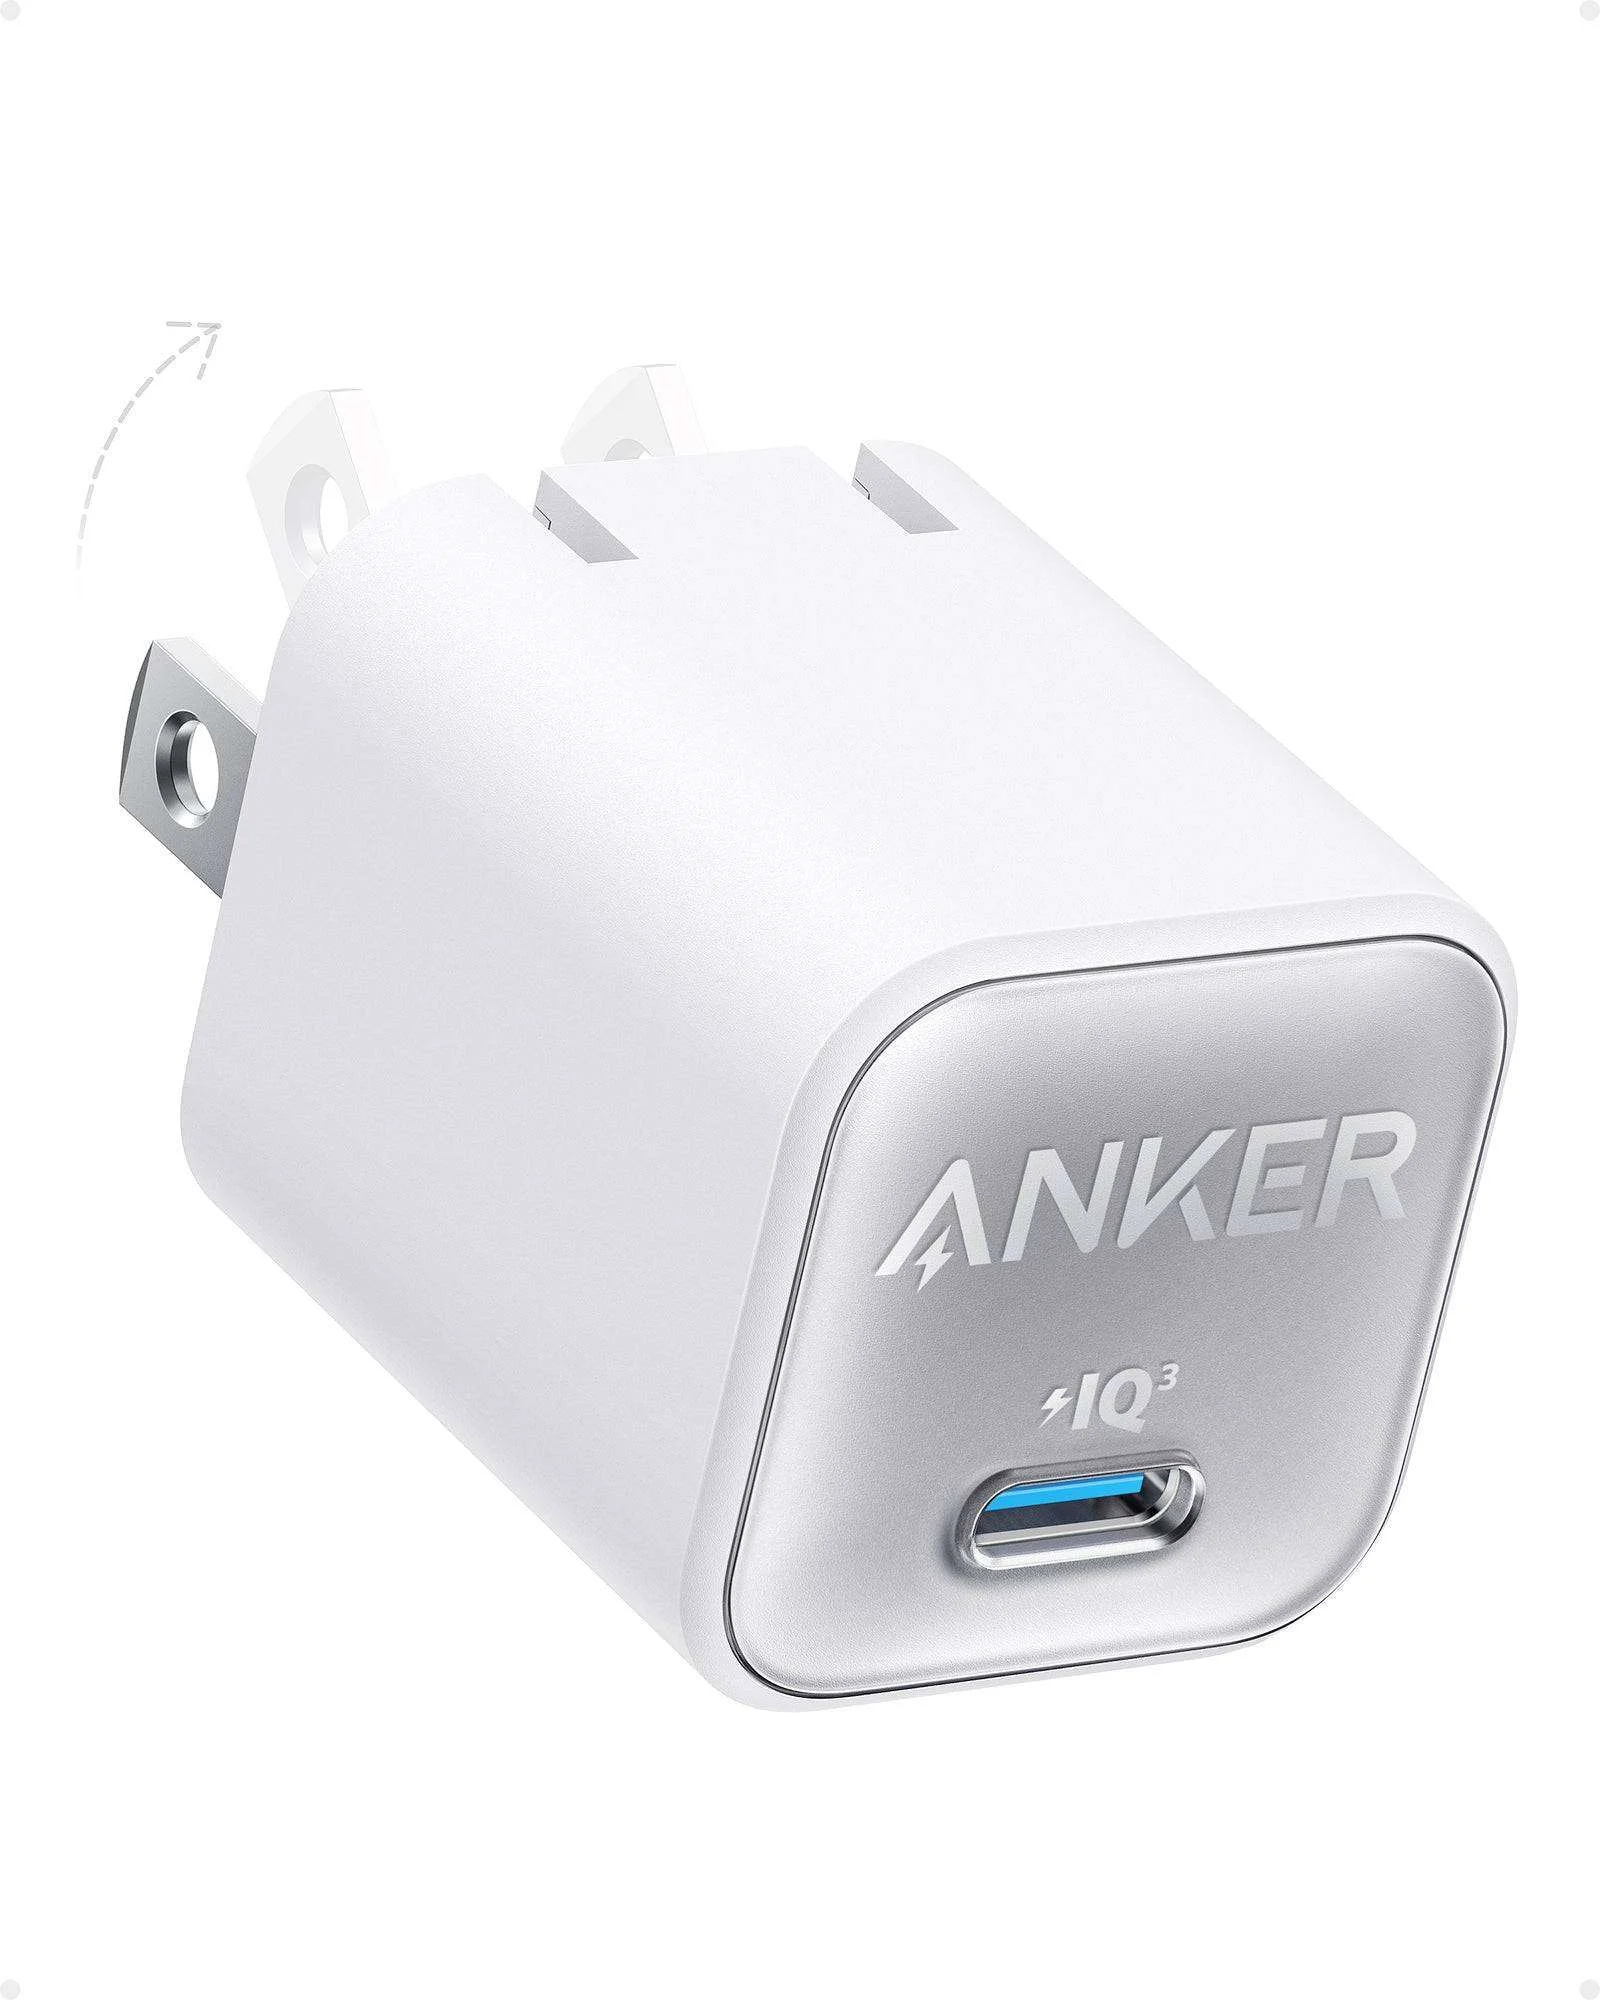 Anker 511 Charger (Nano 3, 30W) Series 5 With USB C to Lightning Cable - B2152